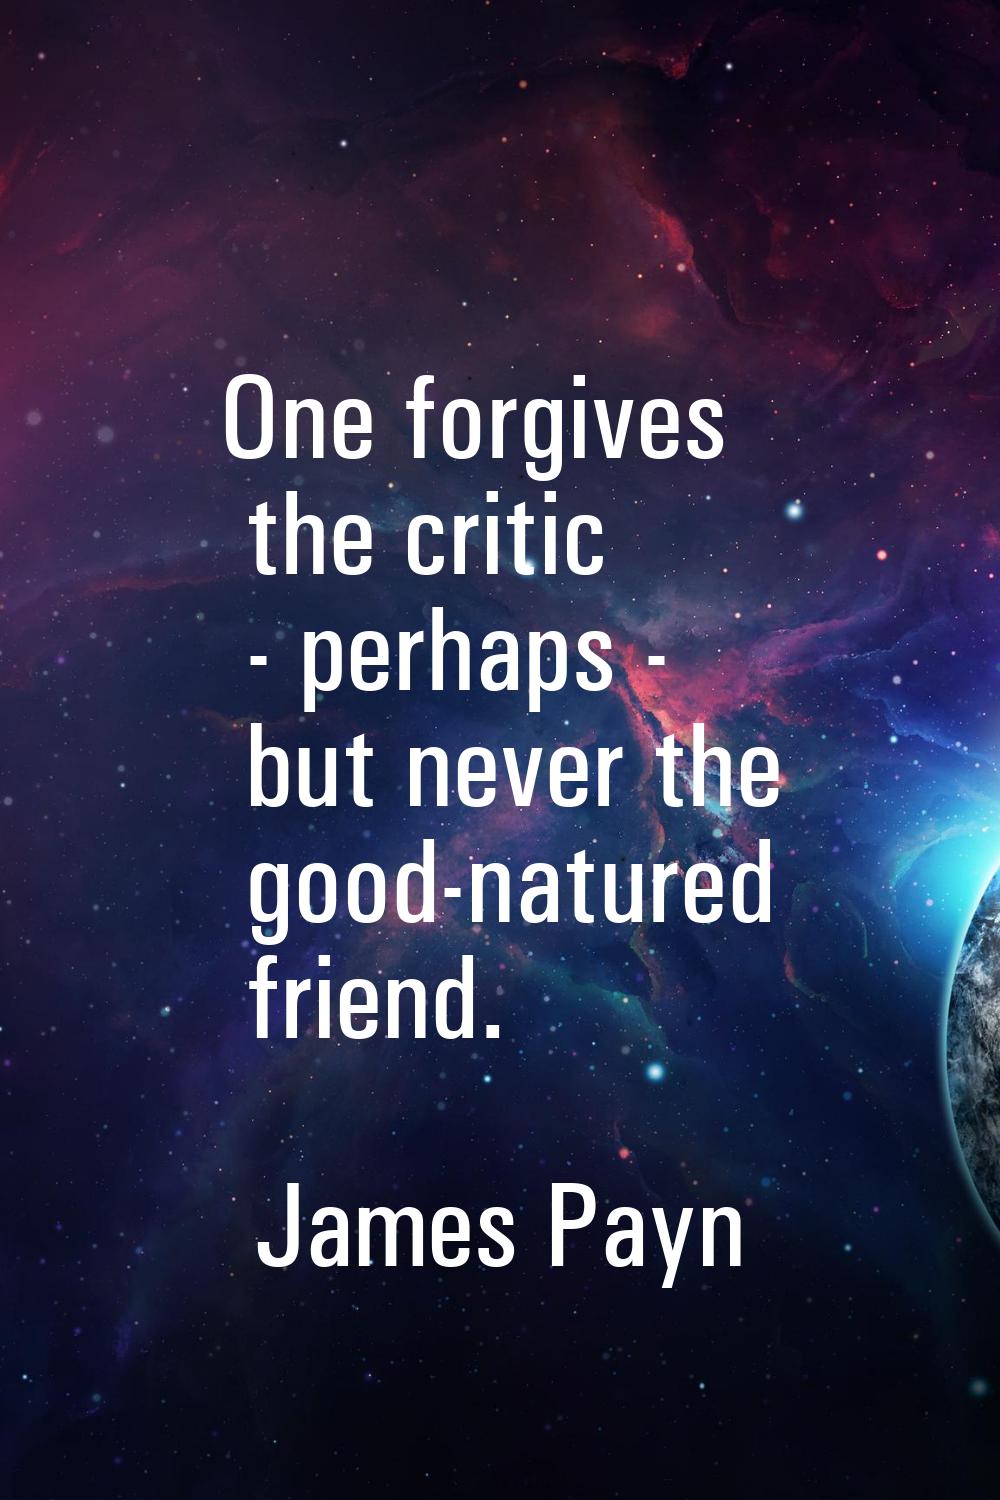 One forgives the critic - perhaps - but never the good-natured friend.